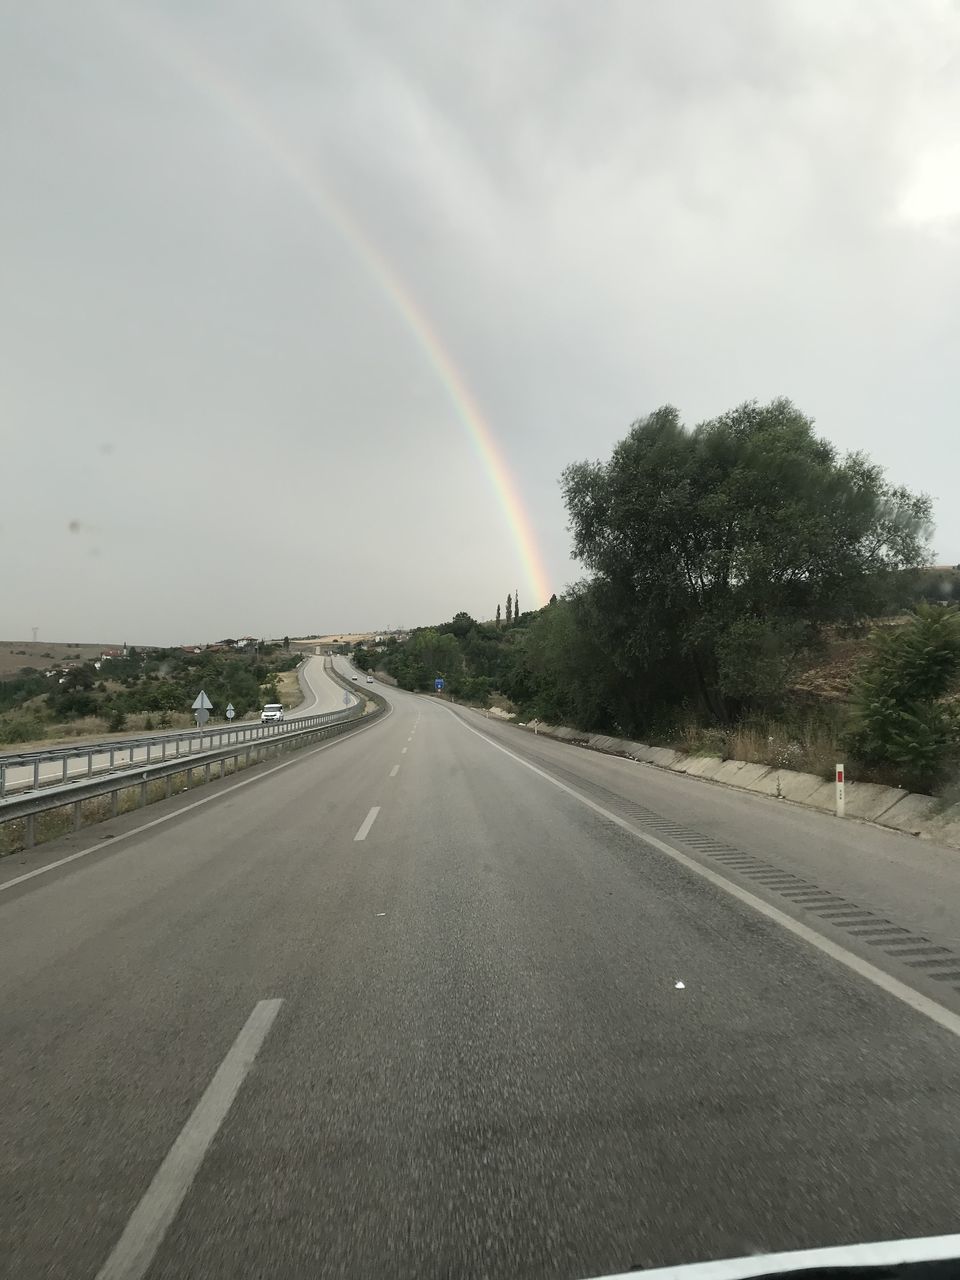 VIEW OF RAINBOW OVER ROAD